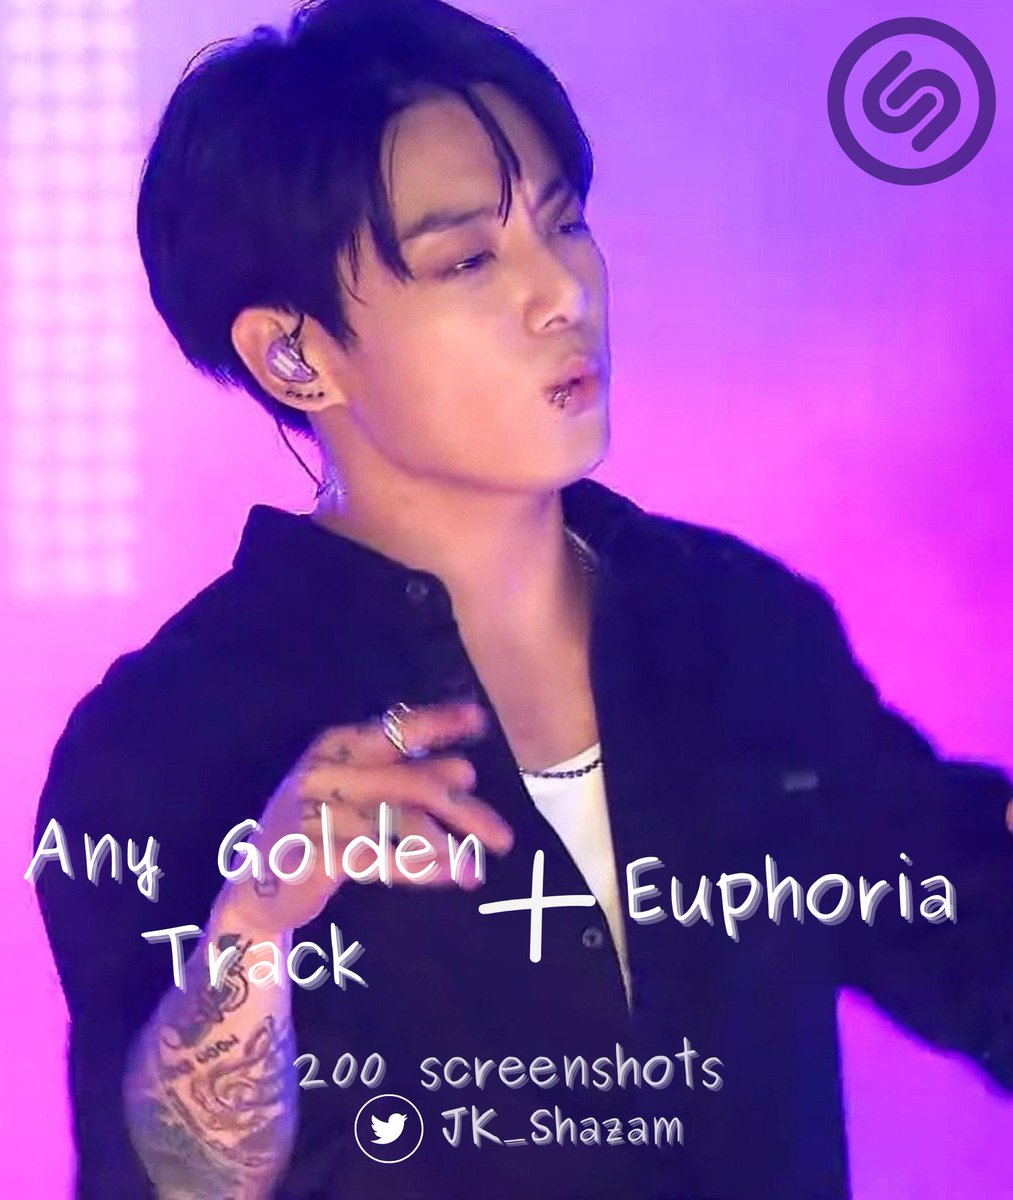 Daily reminder to Shazam 🌟

Drop a Shazam screenshot of any song on Golden or Euphoria! 

🎯 200 screenshots

STREAM GOLDEN
#JungKook_GOLDEN 
#Jungkook_StandingNextToYou